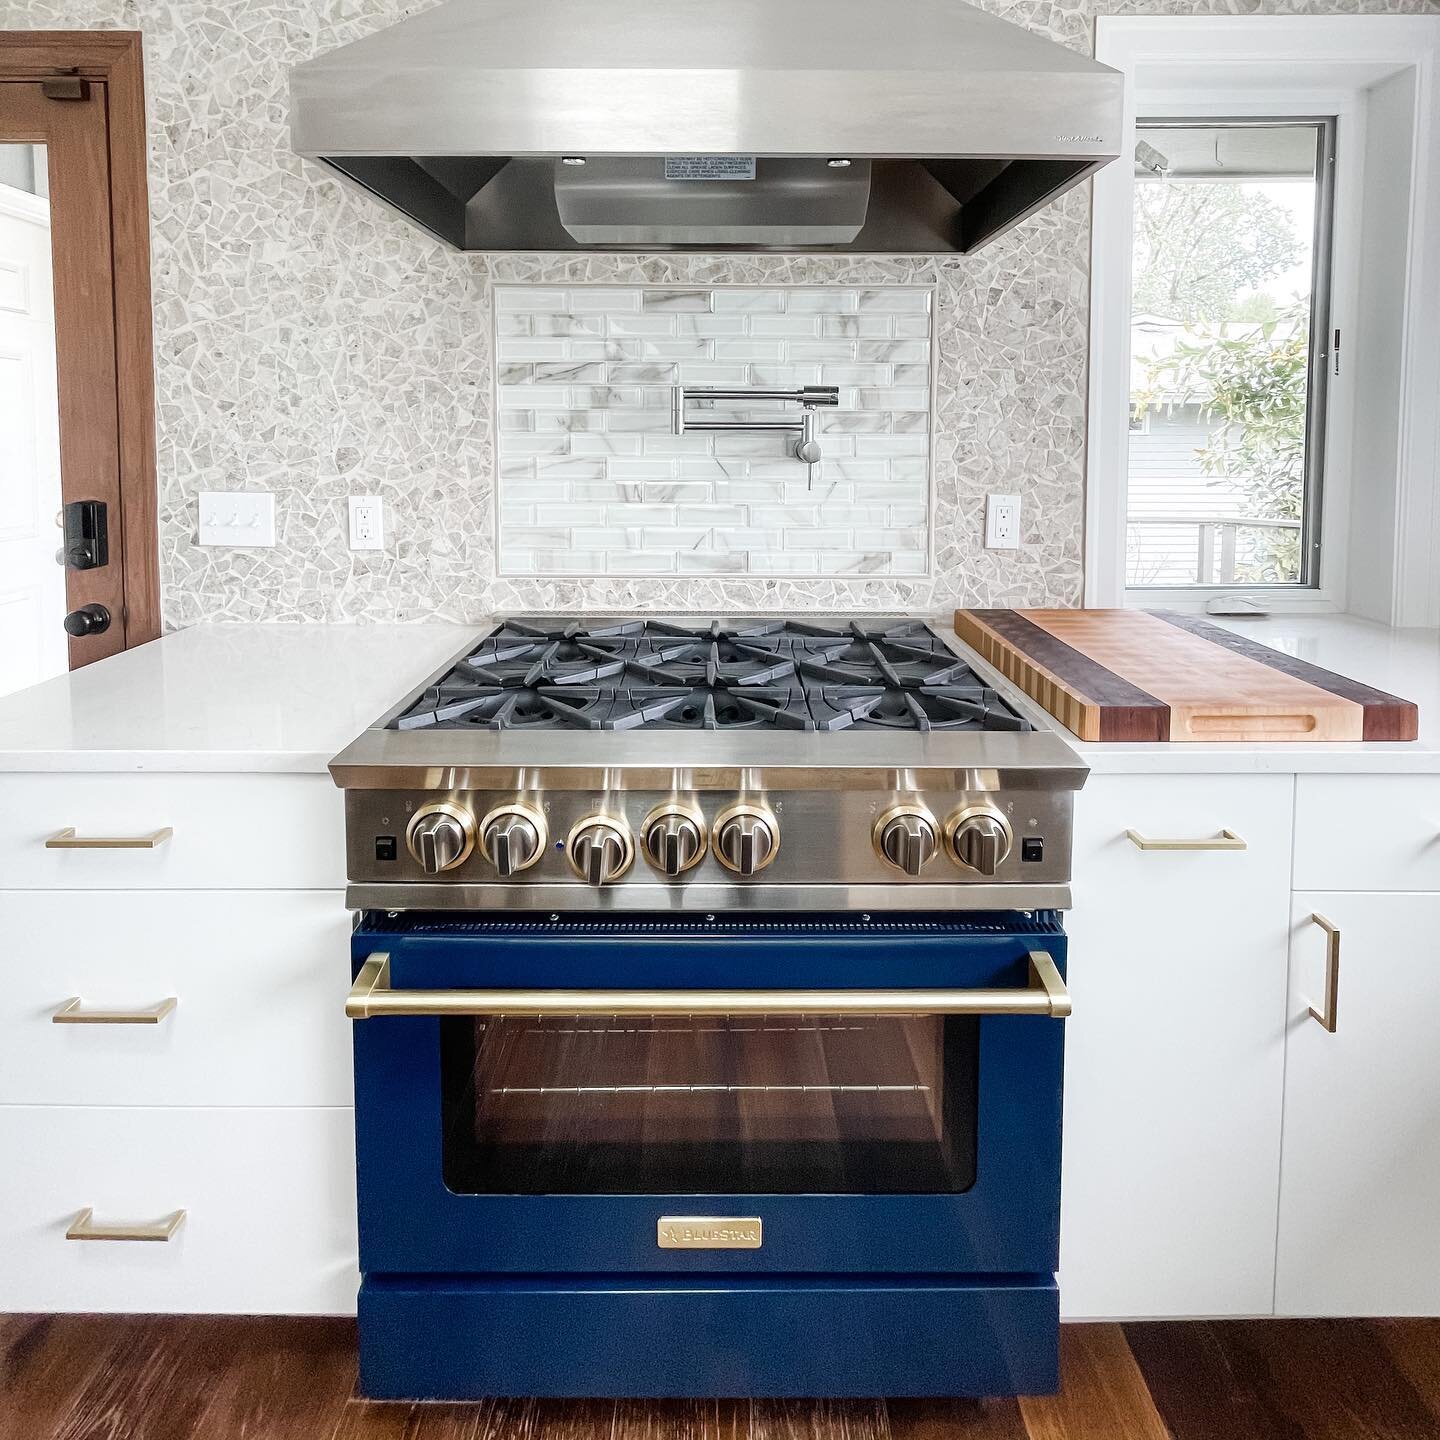 Take 2! This oven is kind of a show stopper don&rsquo;t you think? 💙 Not to mention everything else around it... 
.
.
.
.
.
.
.
#pnwhomes #portlandhomes #homewithaview #homeontheriver #bluecabinets #walnutcabinets #whitekitchencabinets #kitchenbacks